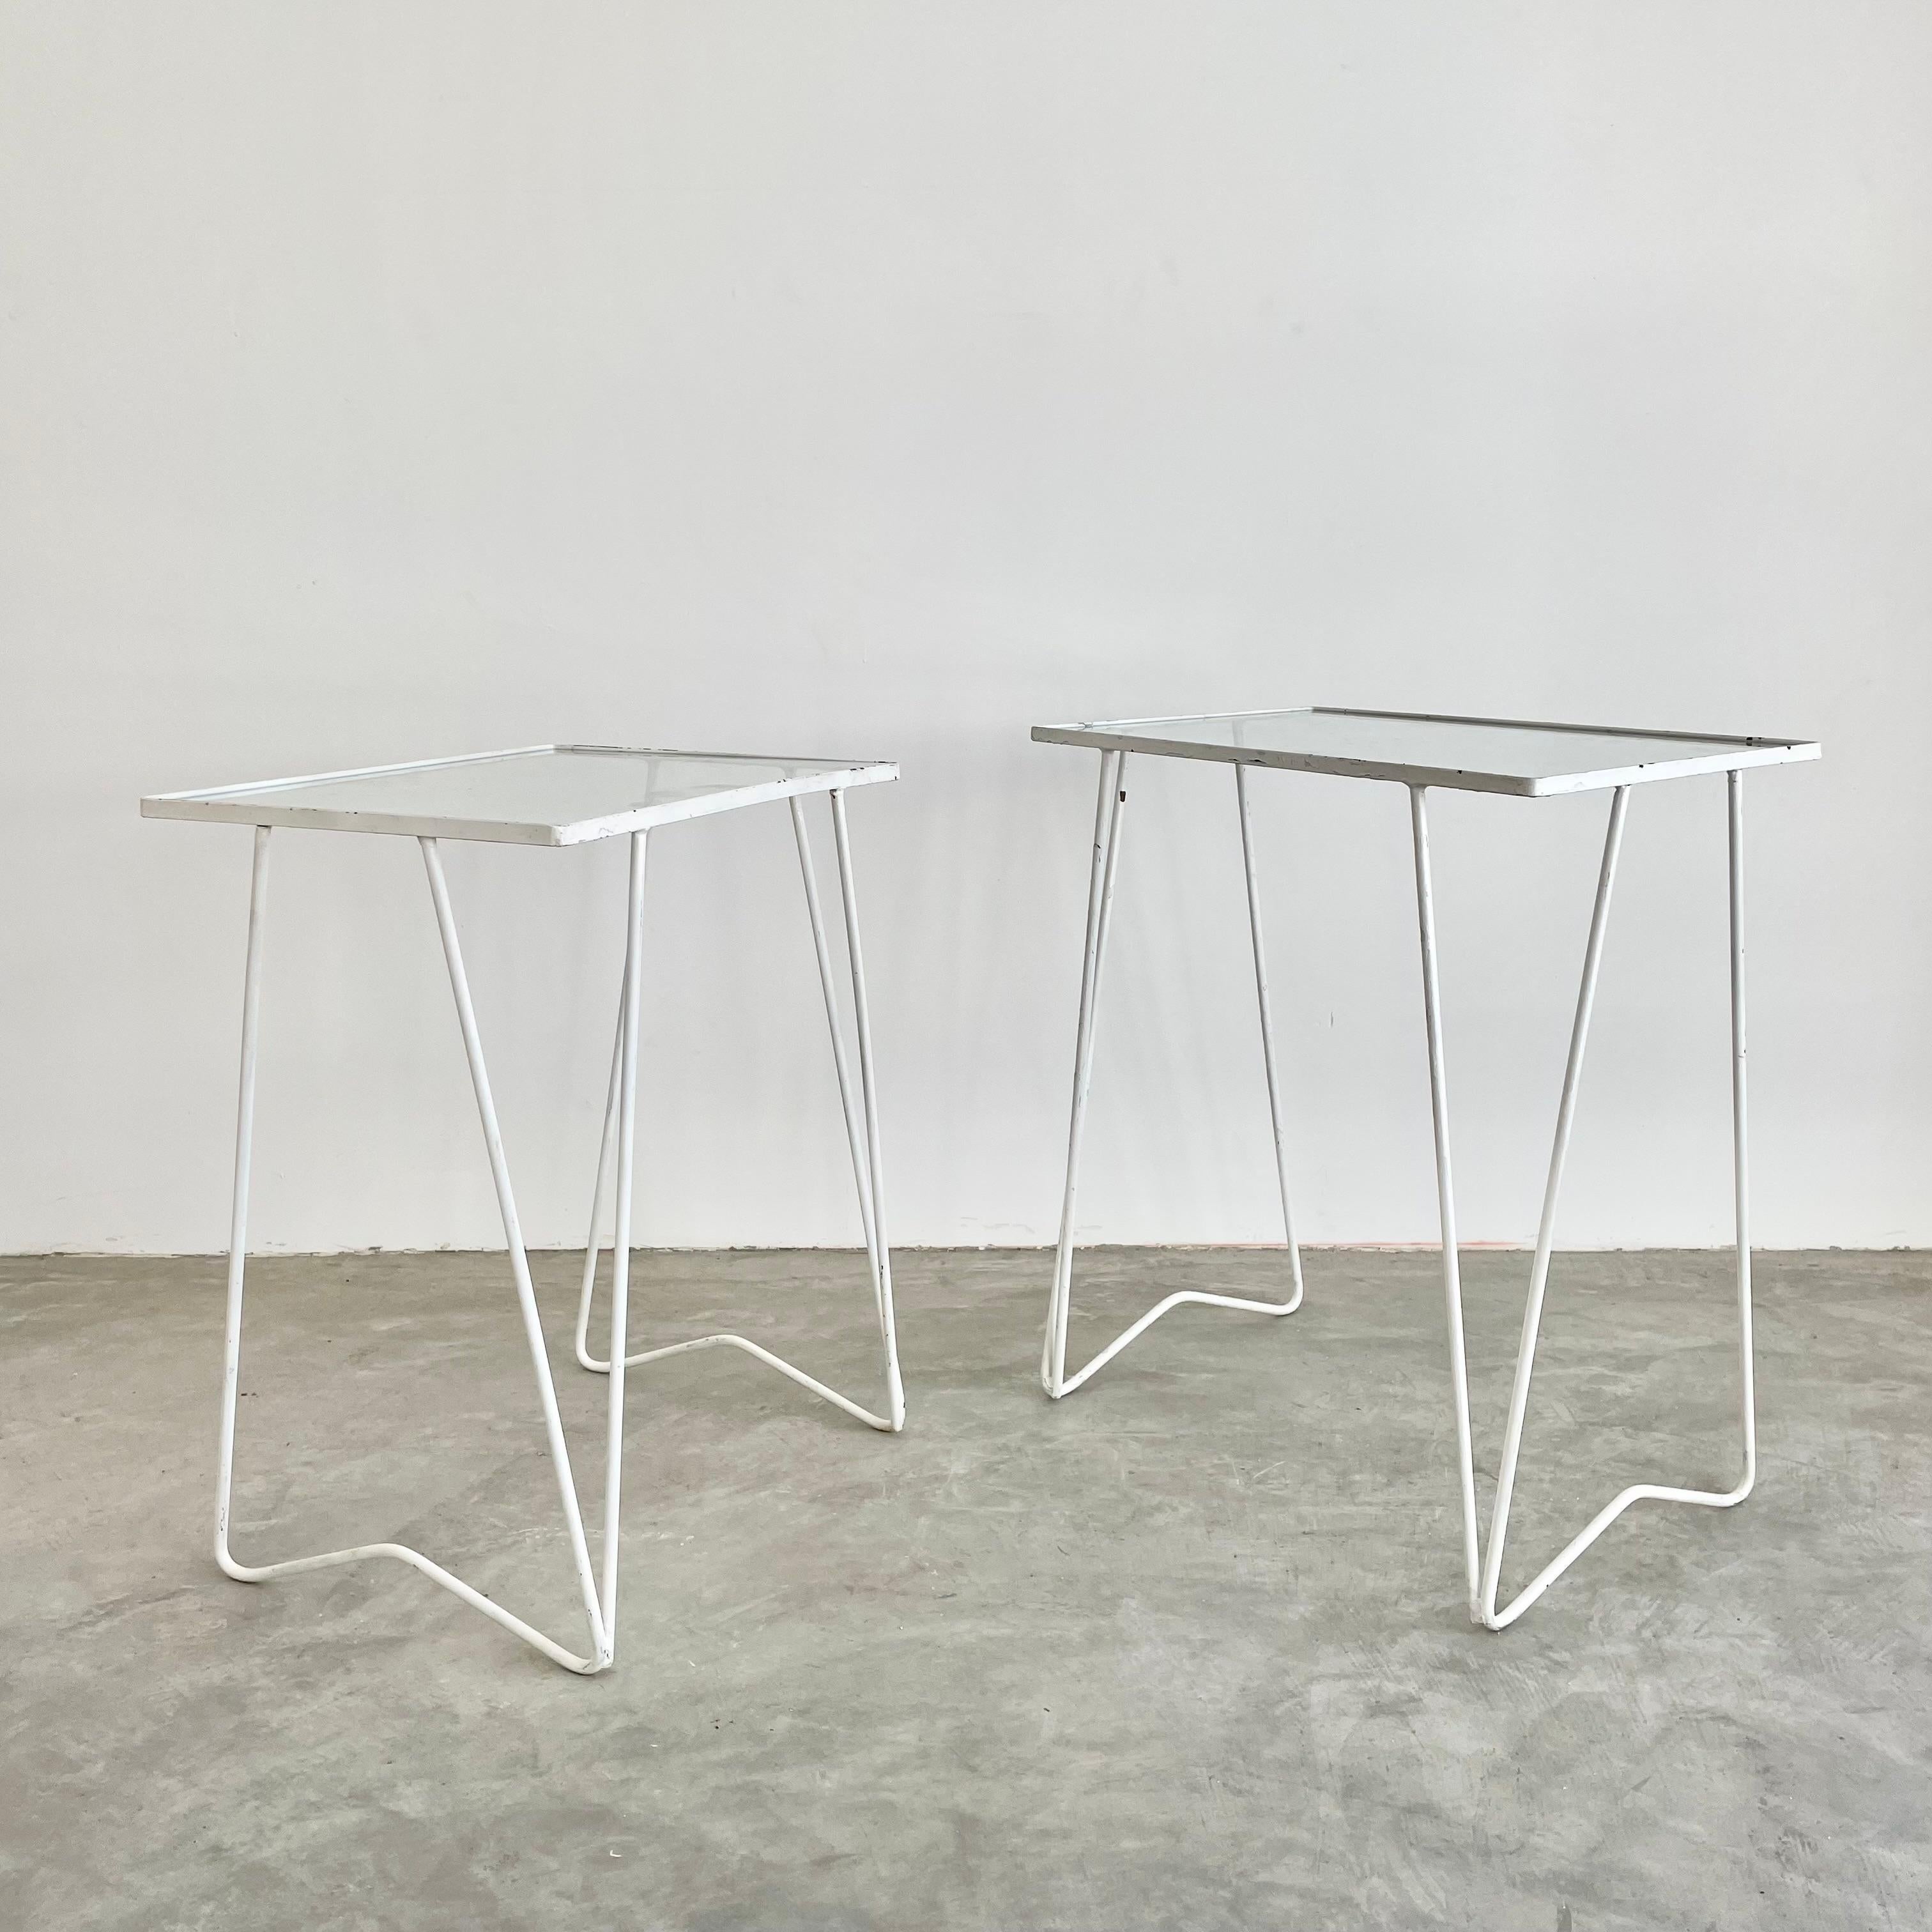 Pair of Iron and Glass Nesting Tables, 1970s USA For Sale 2